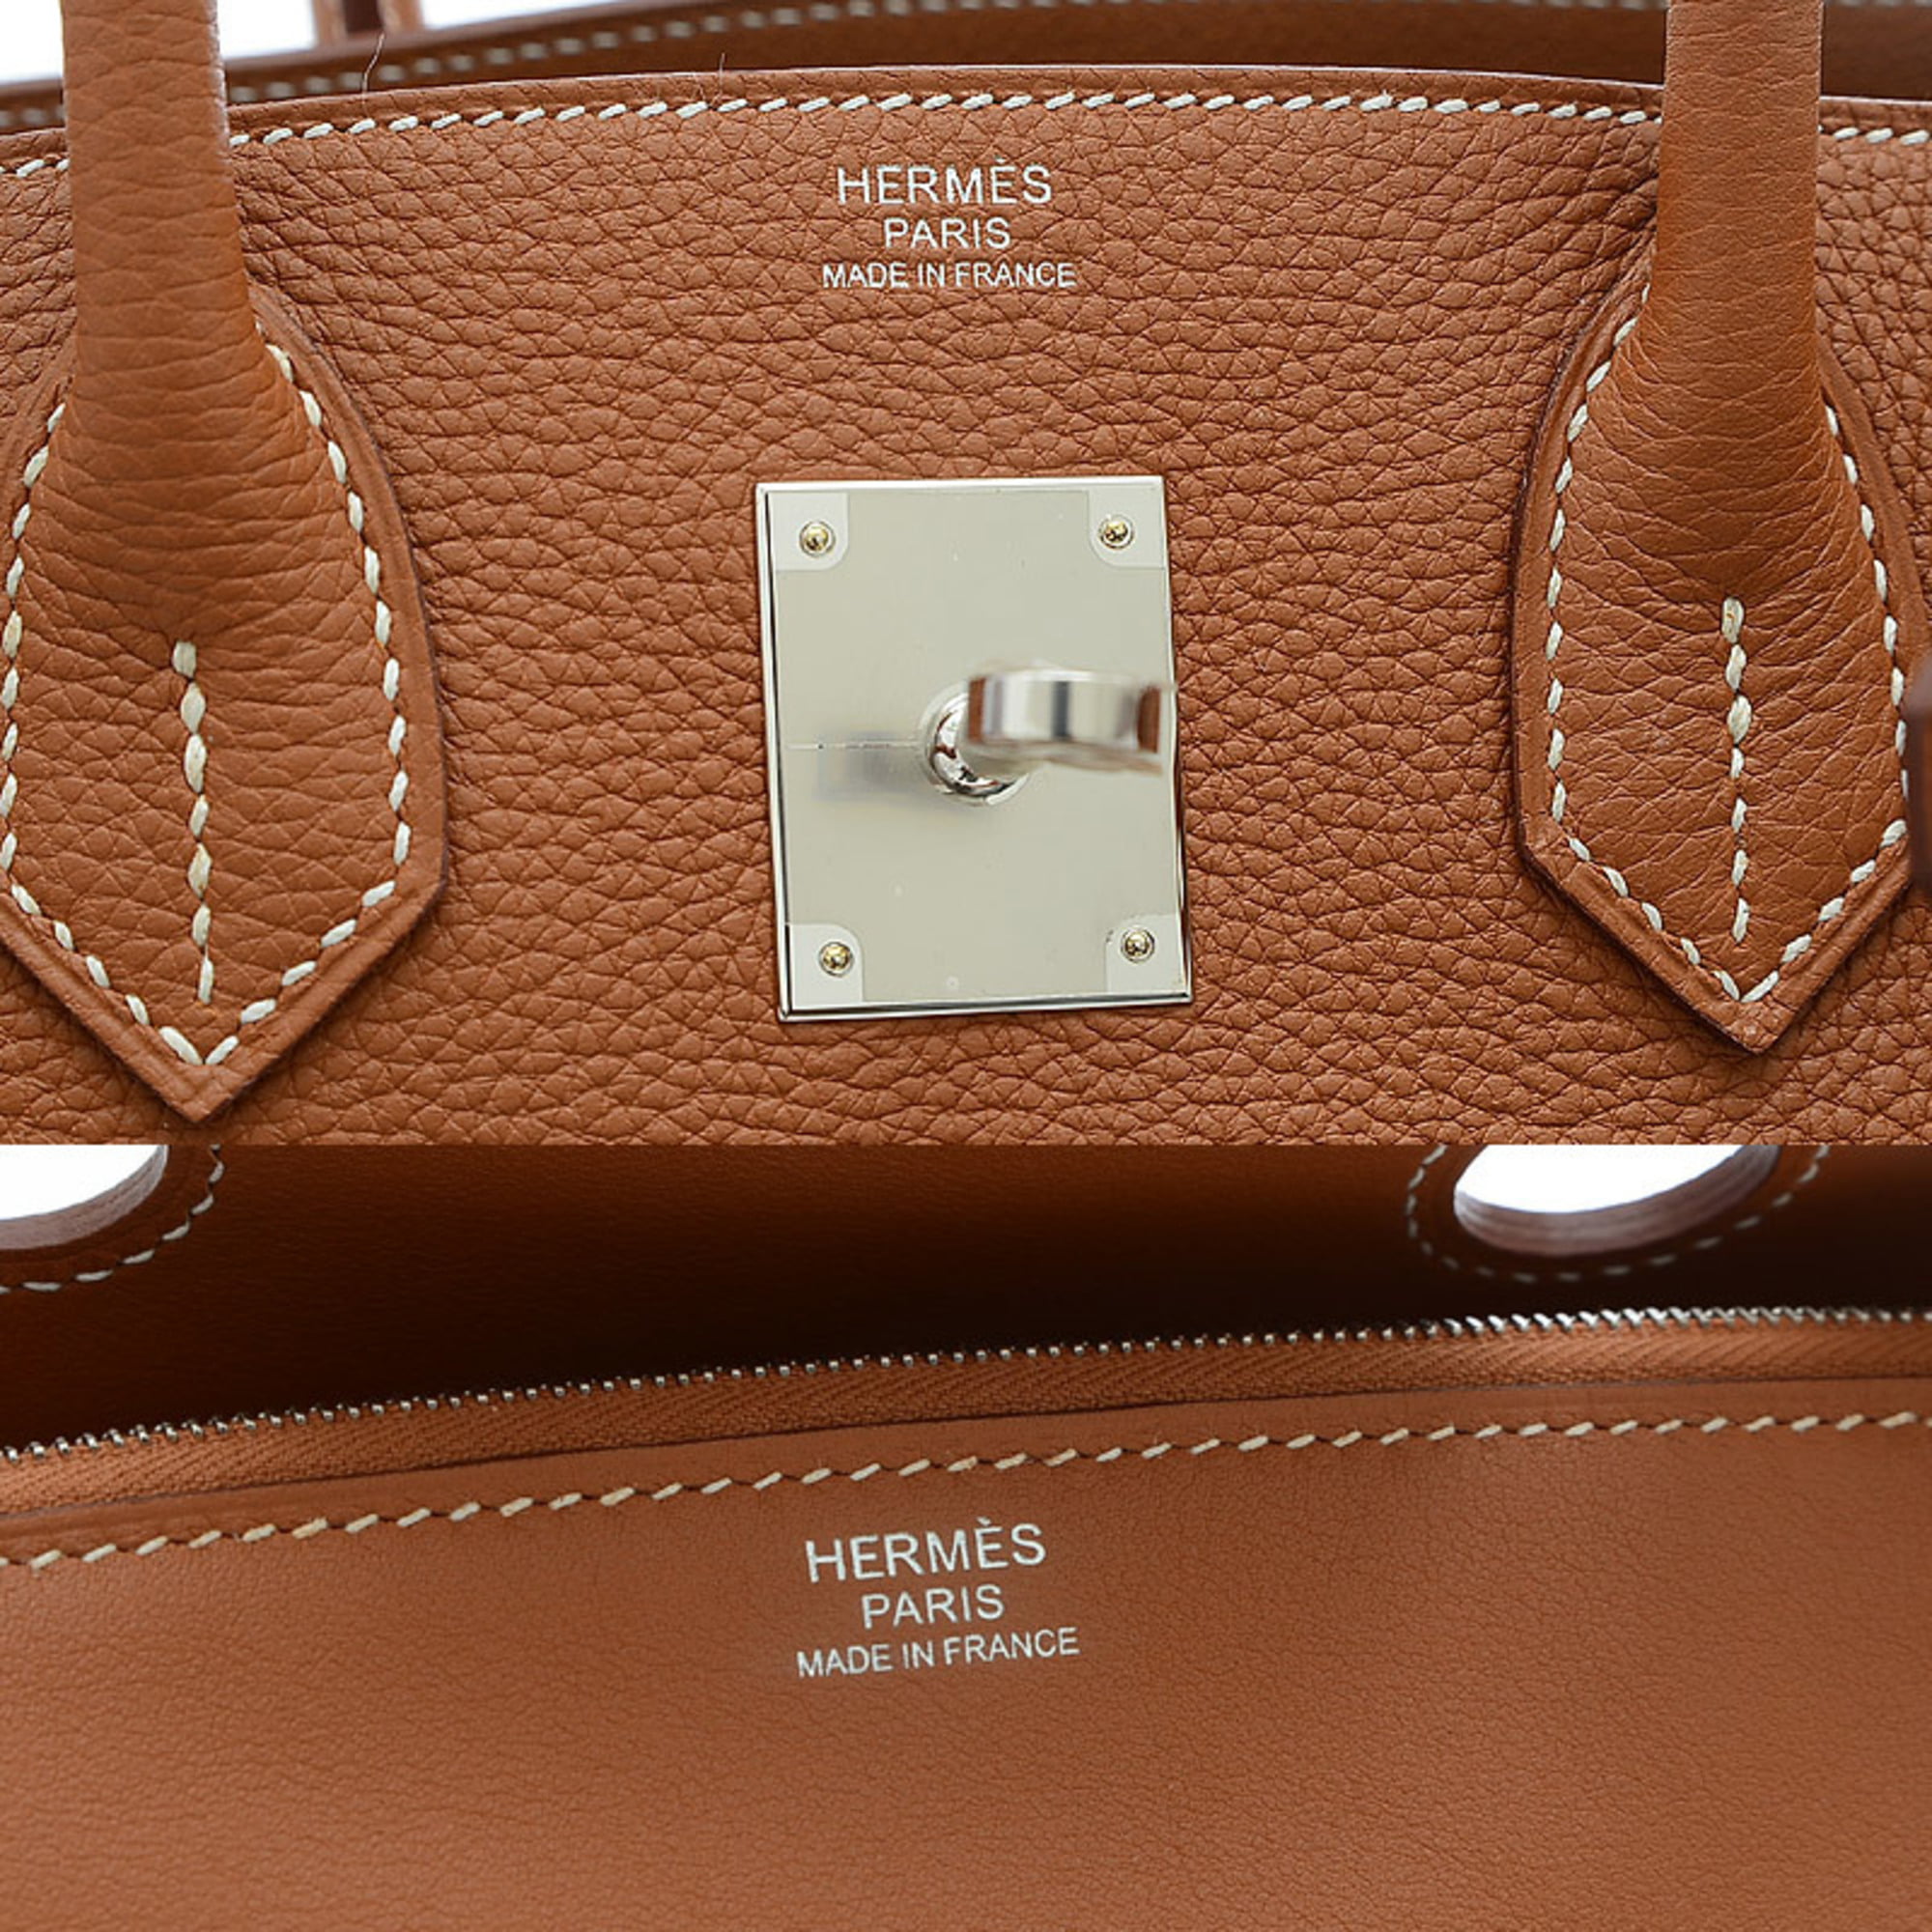 Hermes Birkin 30, Light Blue Swift Leather with Gold Hardware, 2017 A  Stamp, Preowned with Box WA001